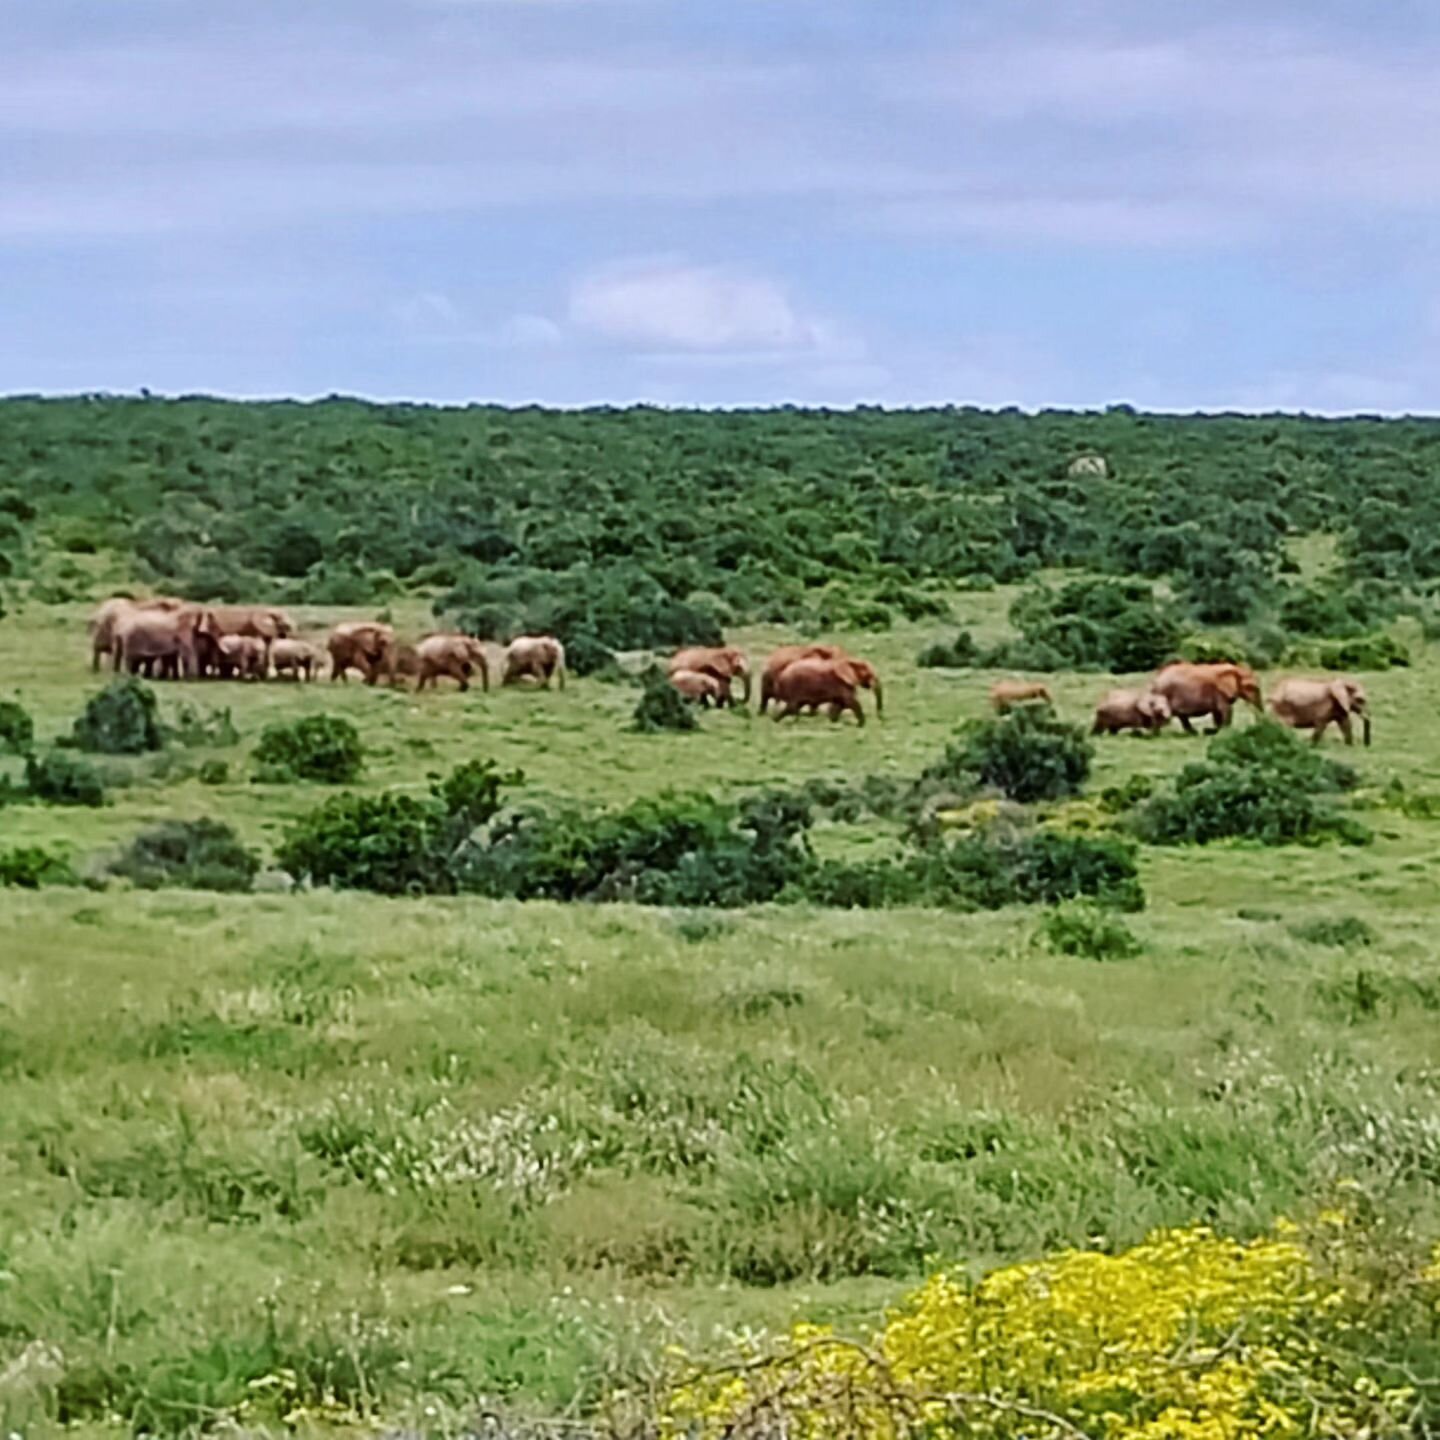 A very special trip to Addo 🐘🤩
.
Being in the bush makes my heart and soul happy 💓
.
There's something about being in and looking at thriving green space that just re-energizes the cells deeply. 🌿🐘
Animals thriving and happy and babies everywher